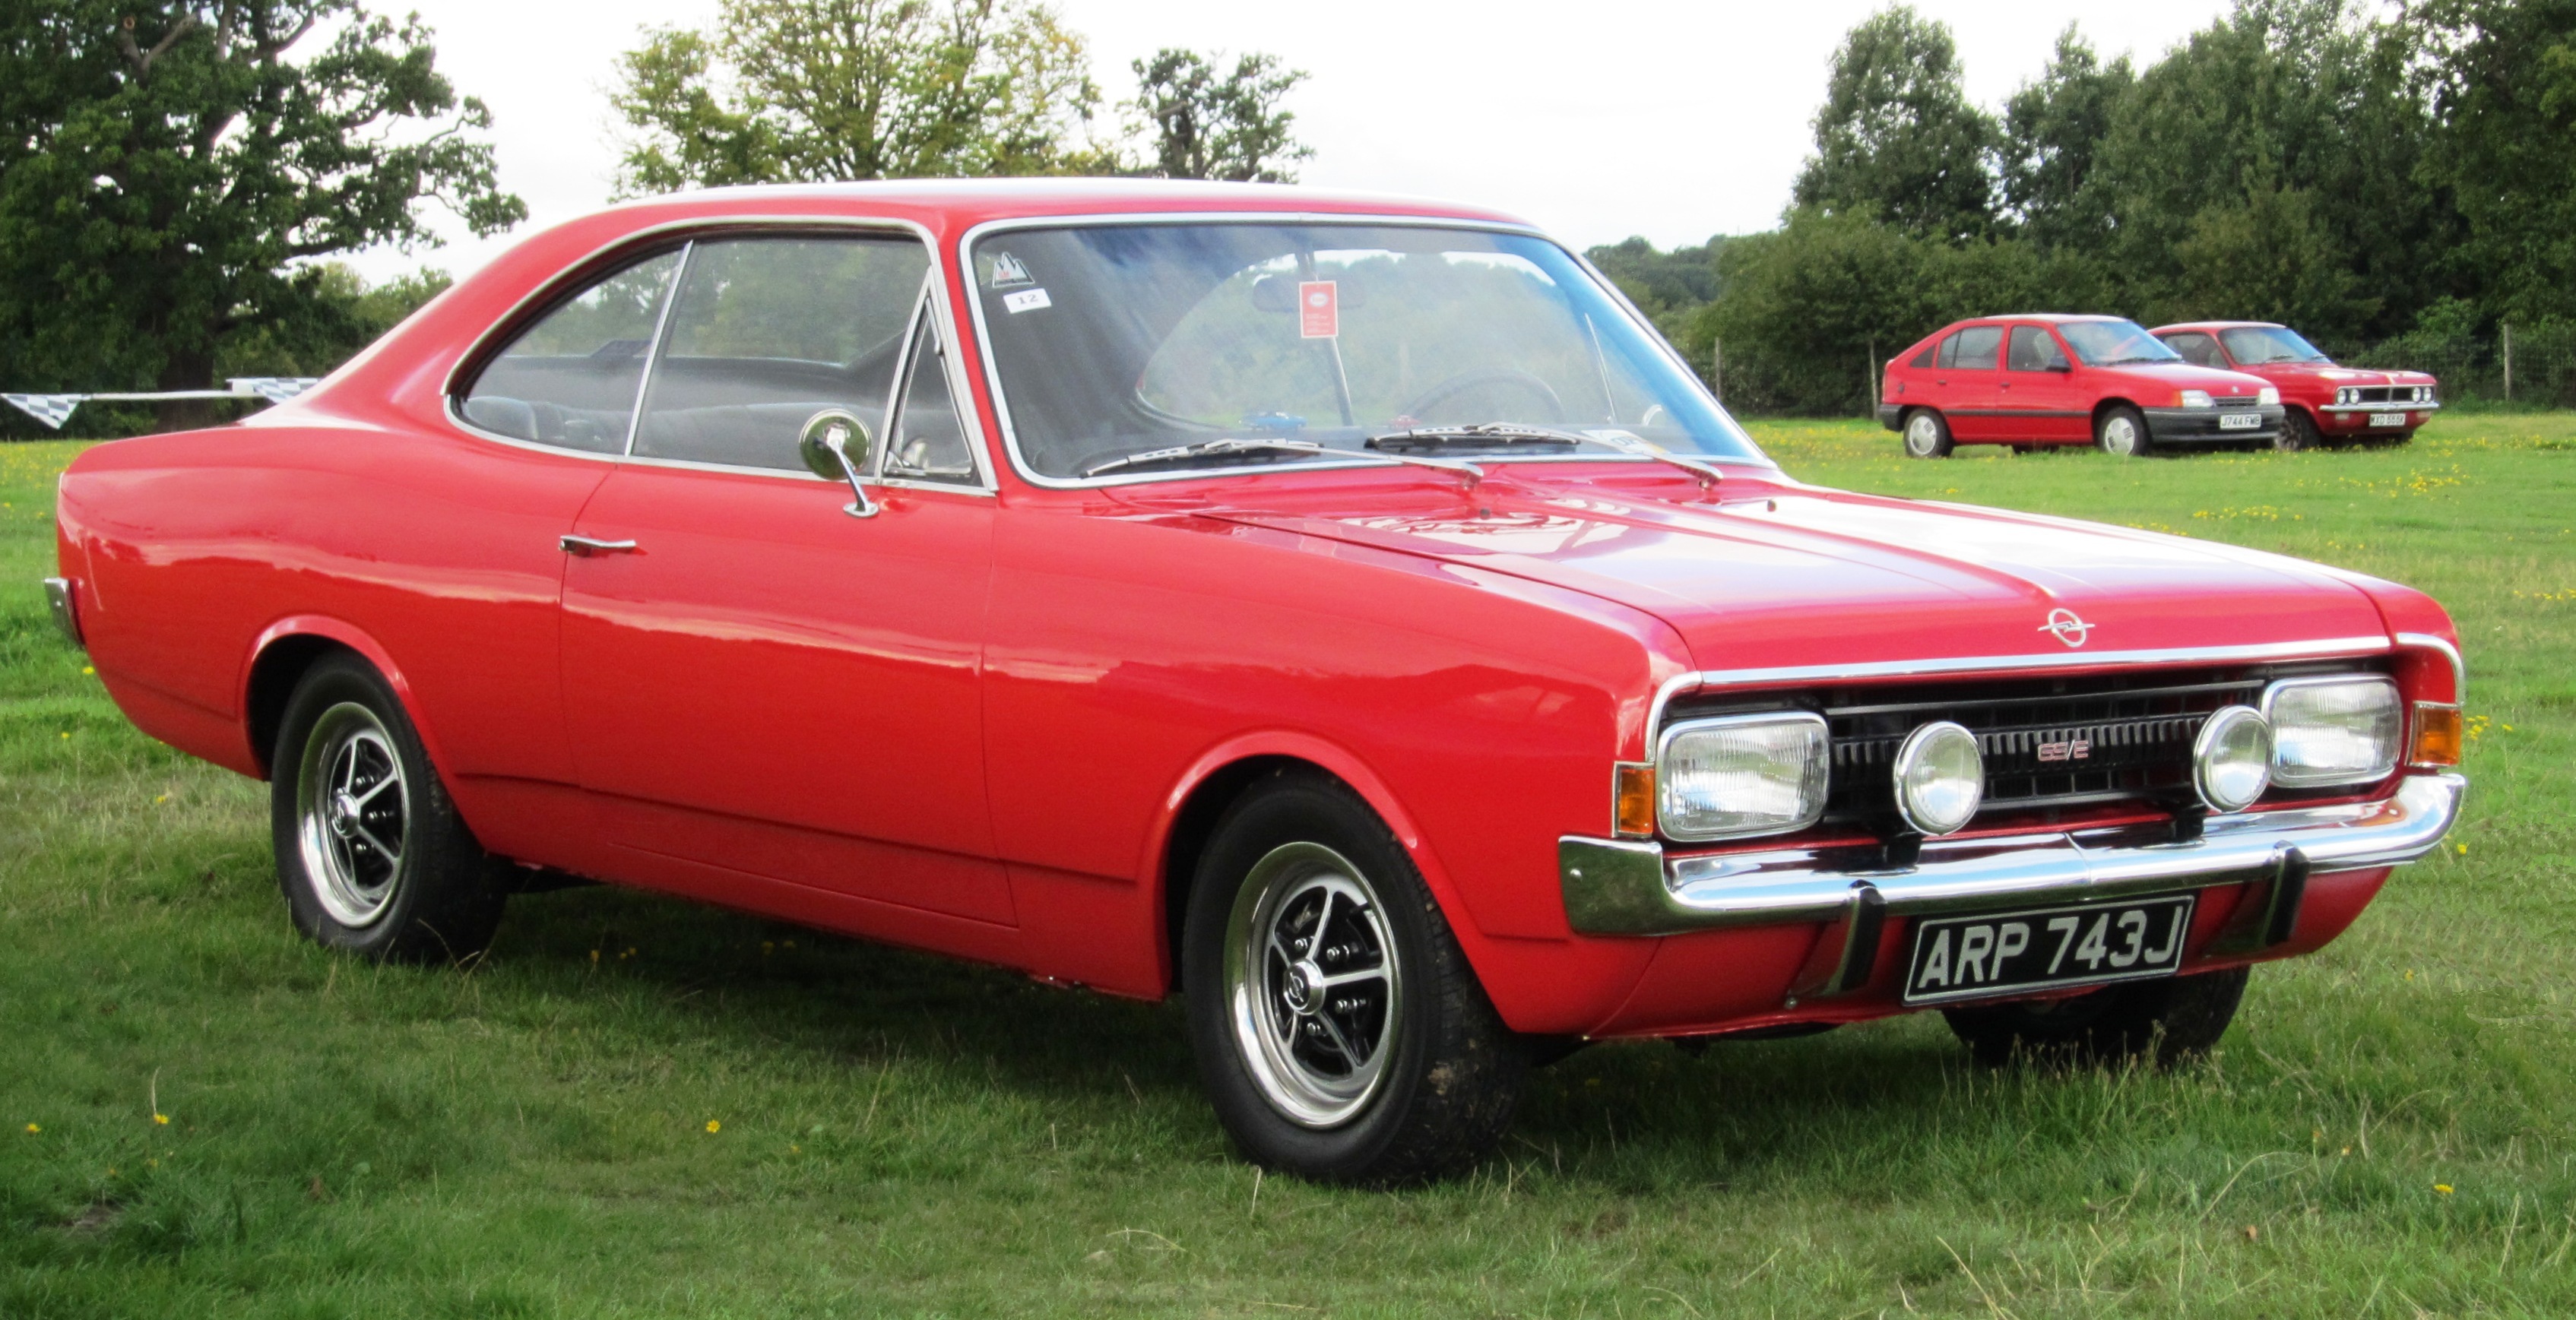 File:Opel Commodore GSE Coupe 2490cc 1971.jpg - Wikimedia Commons